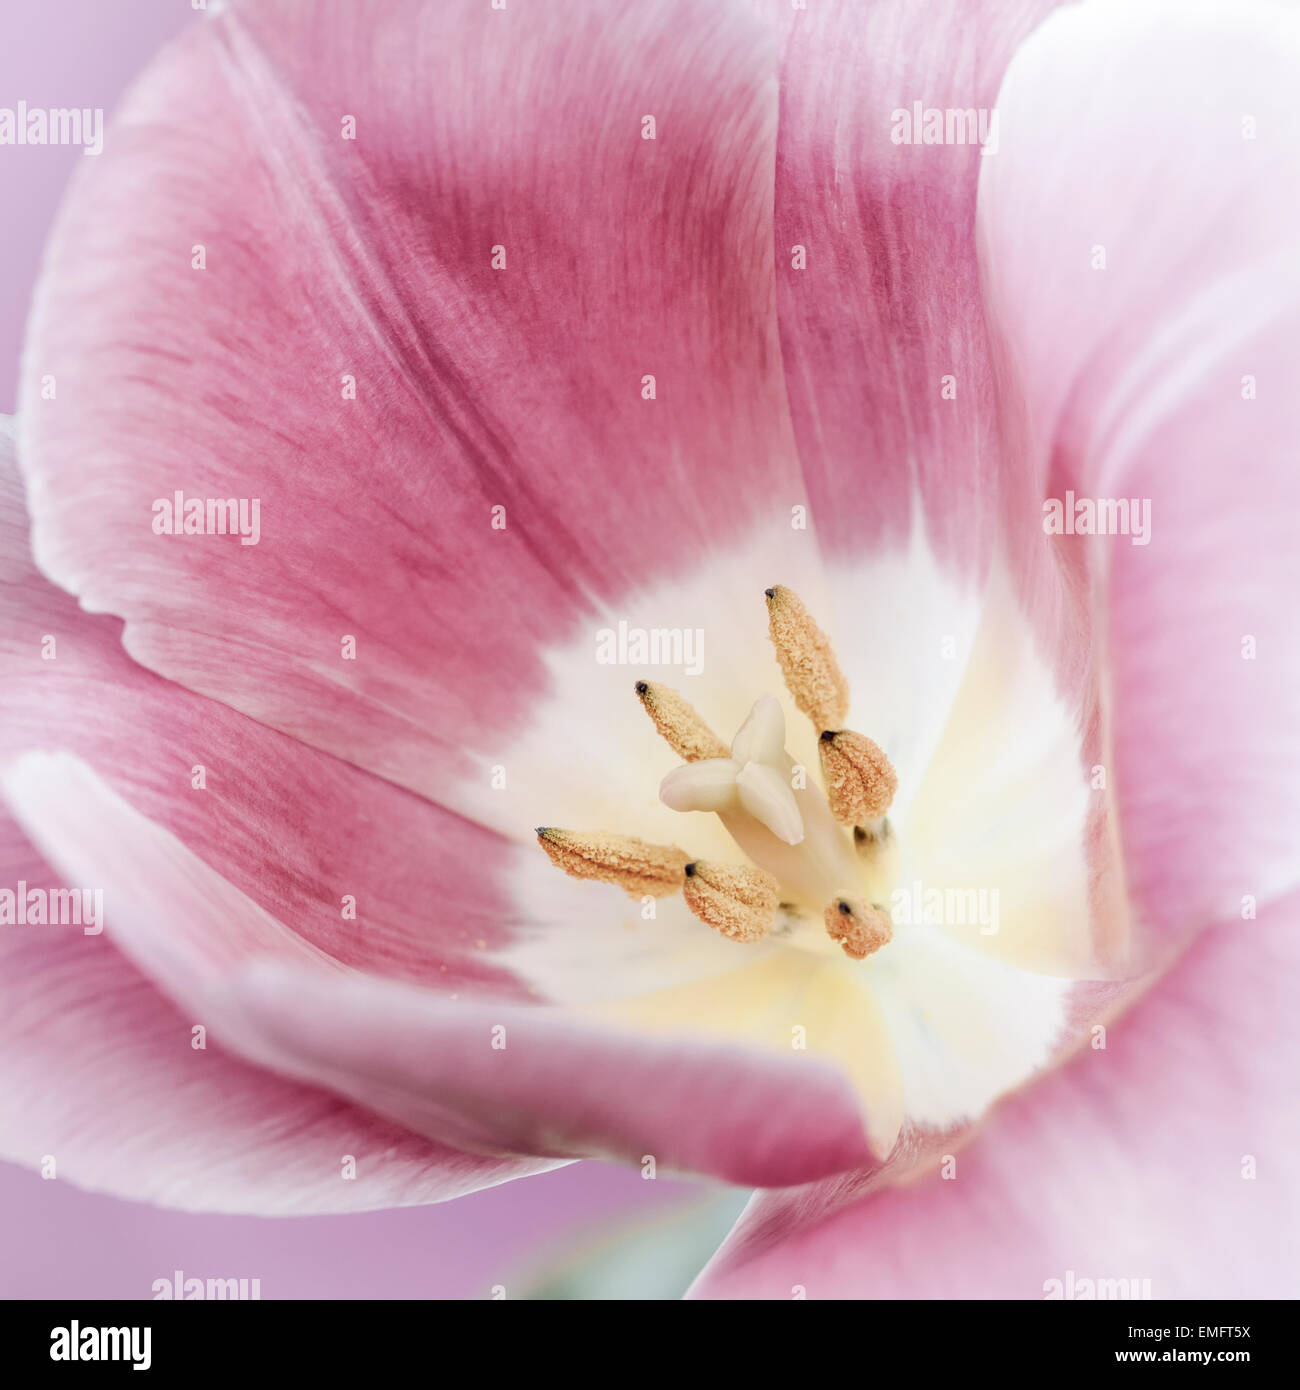 Macro closeup of pink tulip flower with pistil and stamens, square format Stock Photo